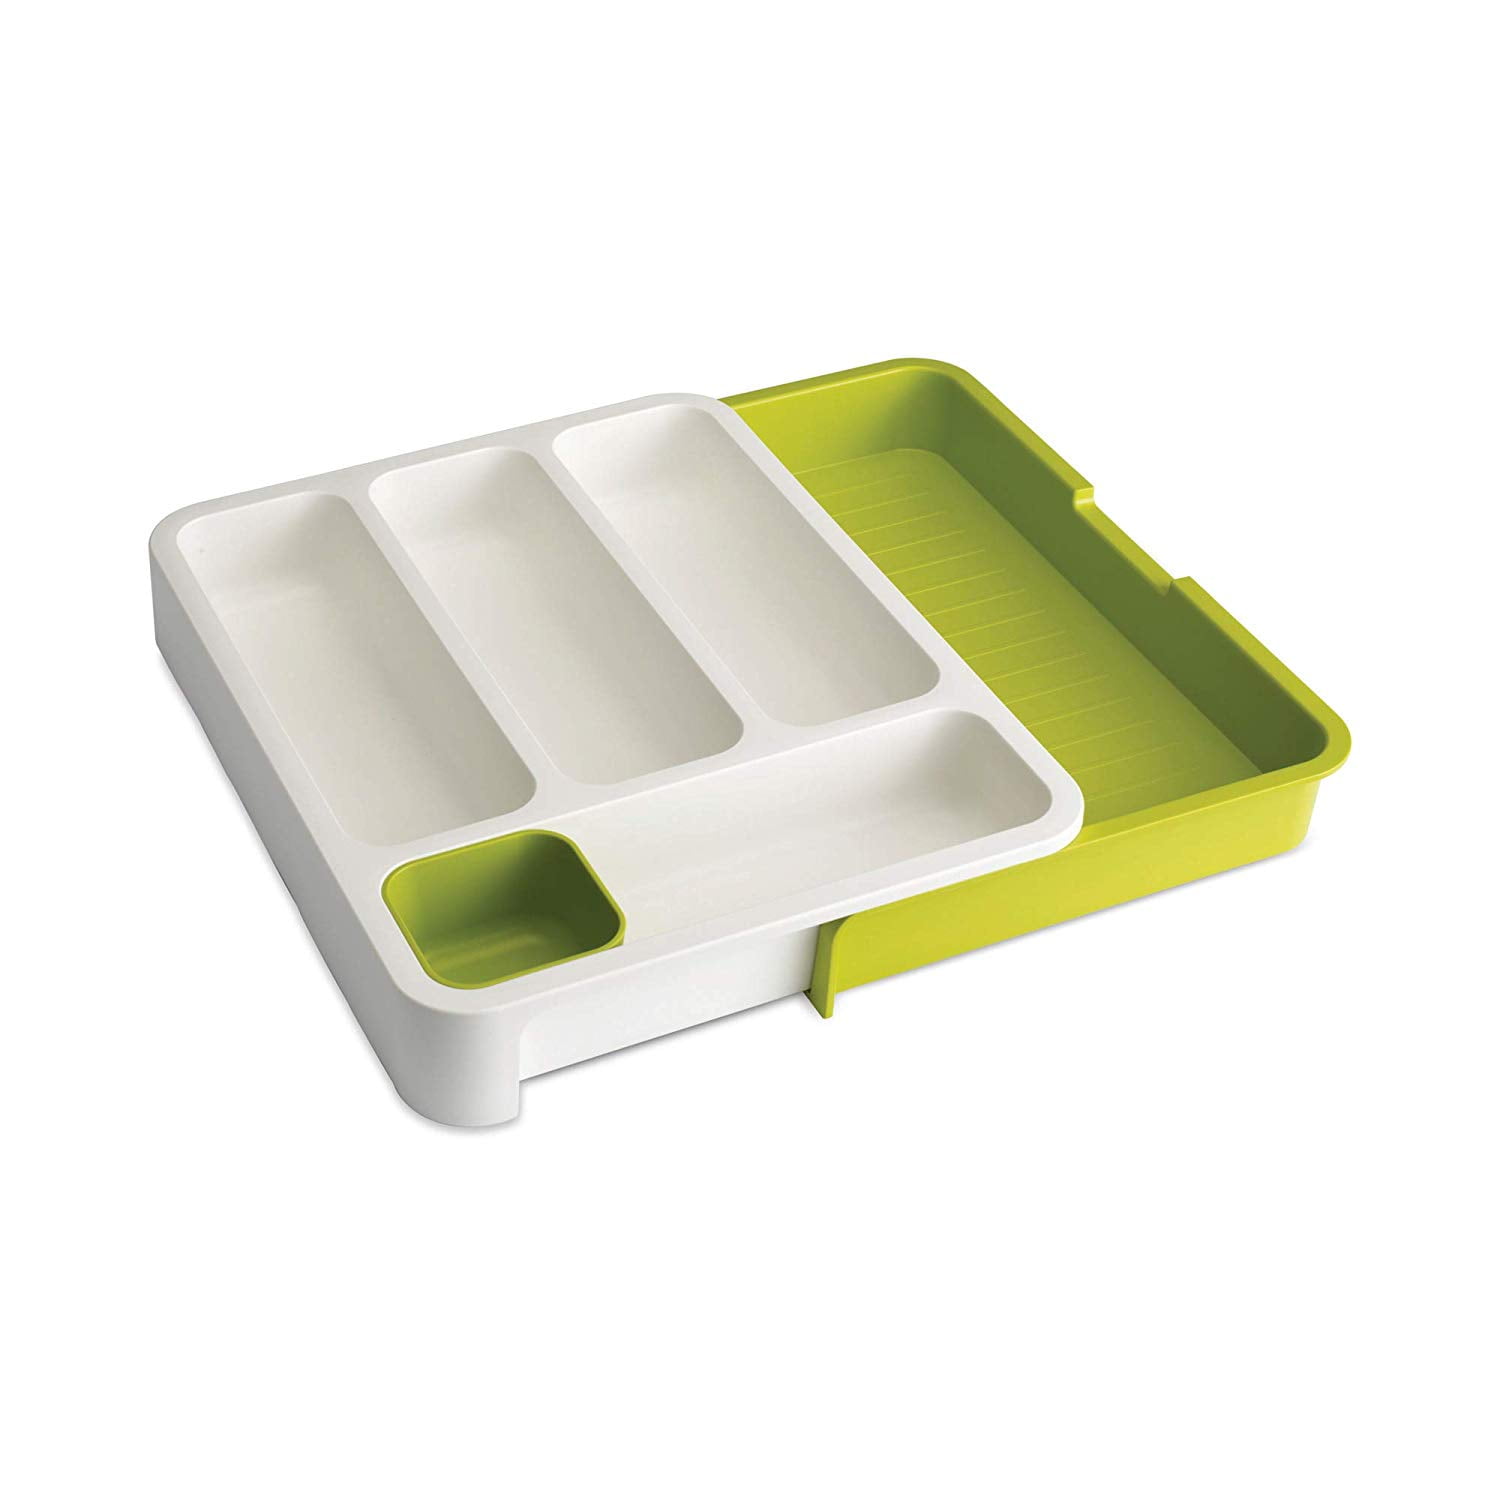 Details about   Joseph Joseph DrawerStore Expandable Cutlery Tray  Gray 